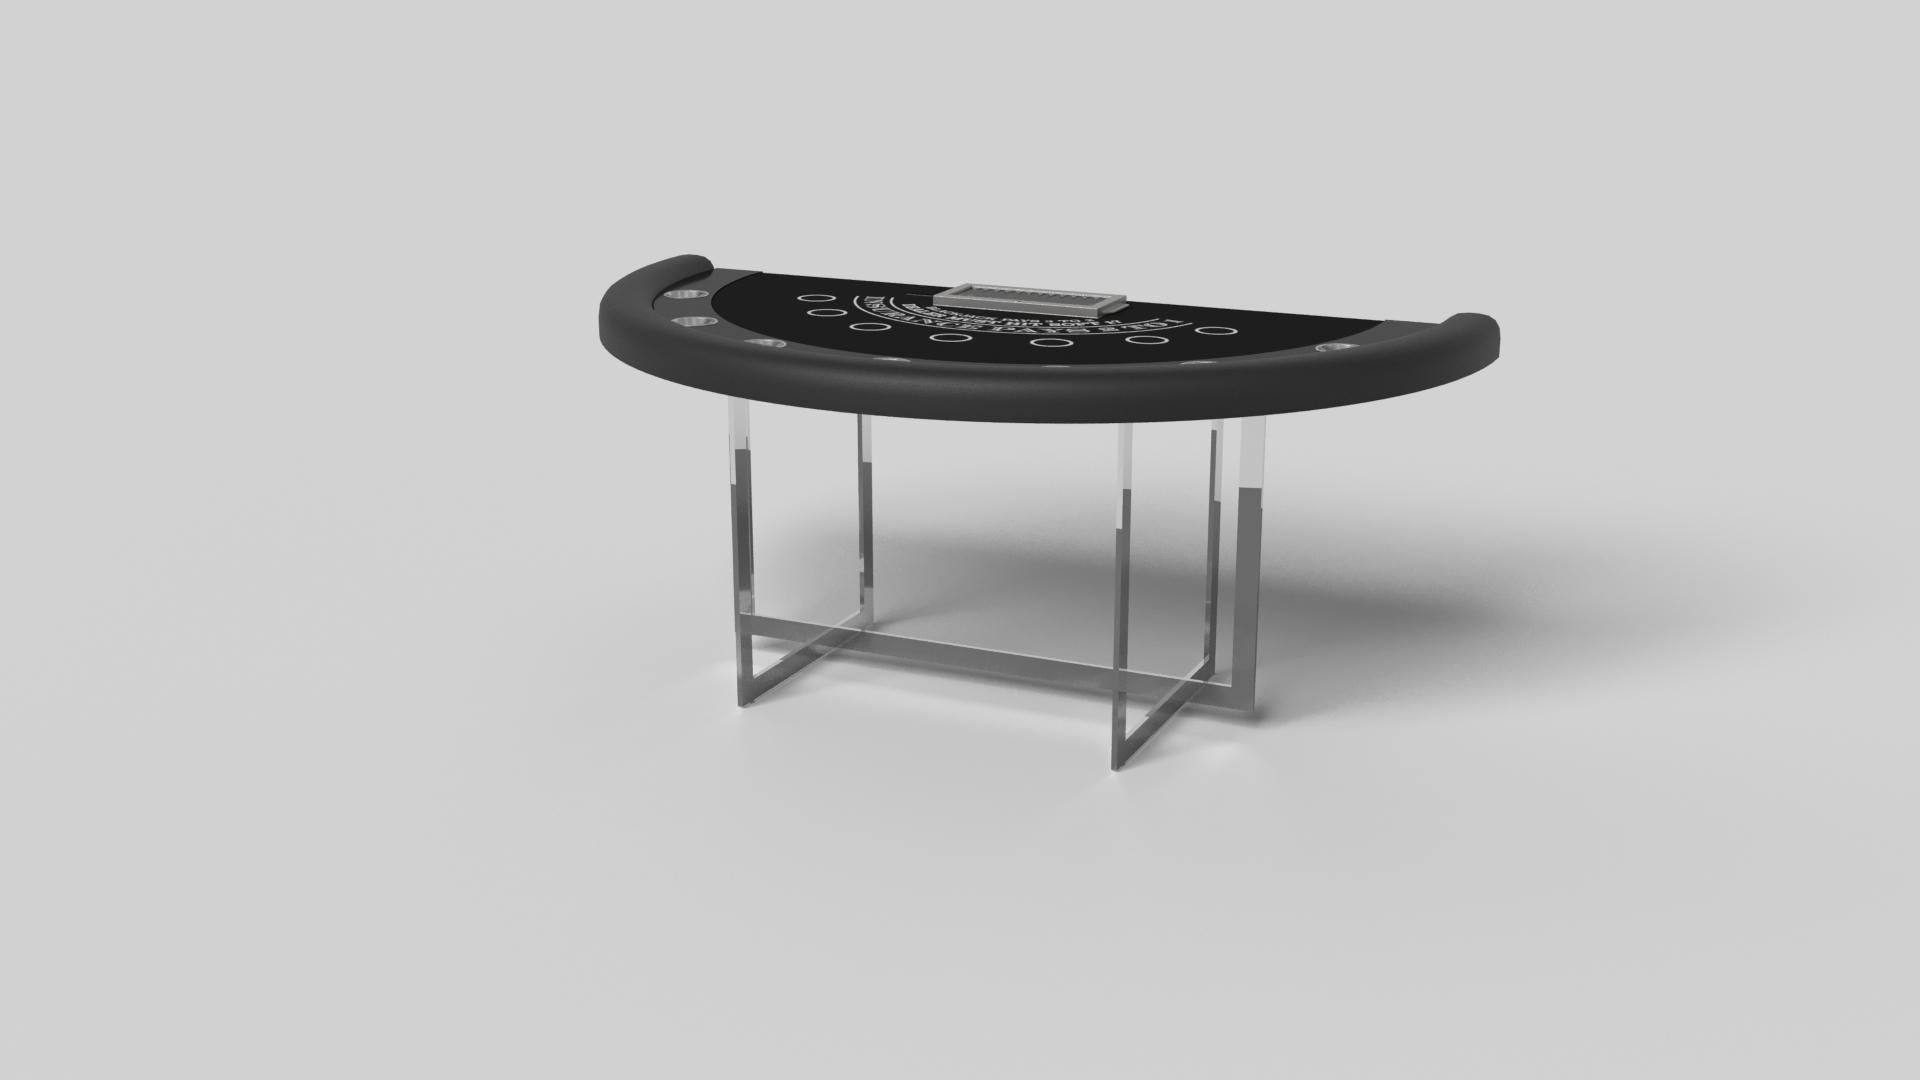 With an open metal foundation, our Beso table is a unique expression of contemporary forms and negative space. This blackjack table is handcrafted by our master artisans with a rectangle-in-rectangle base that echoes the angles and edges of a